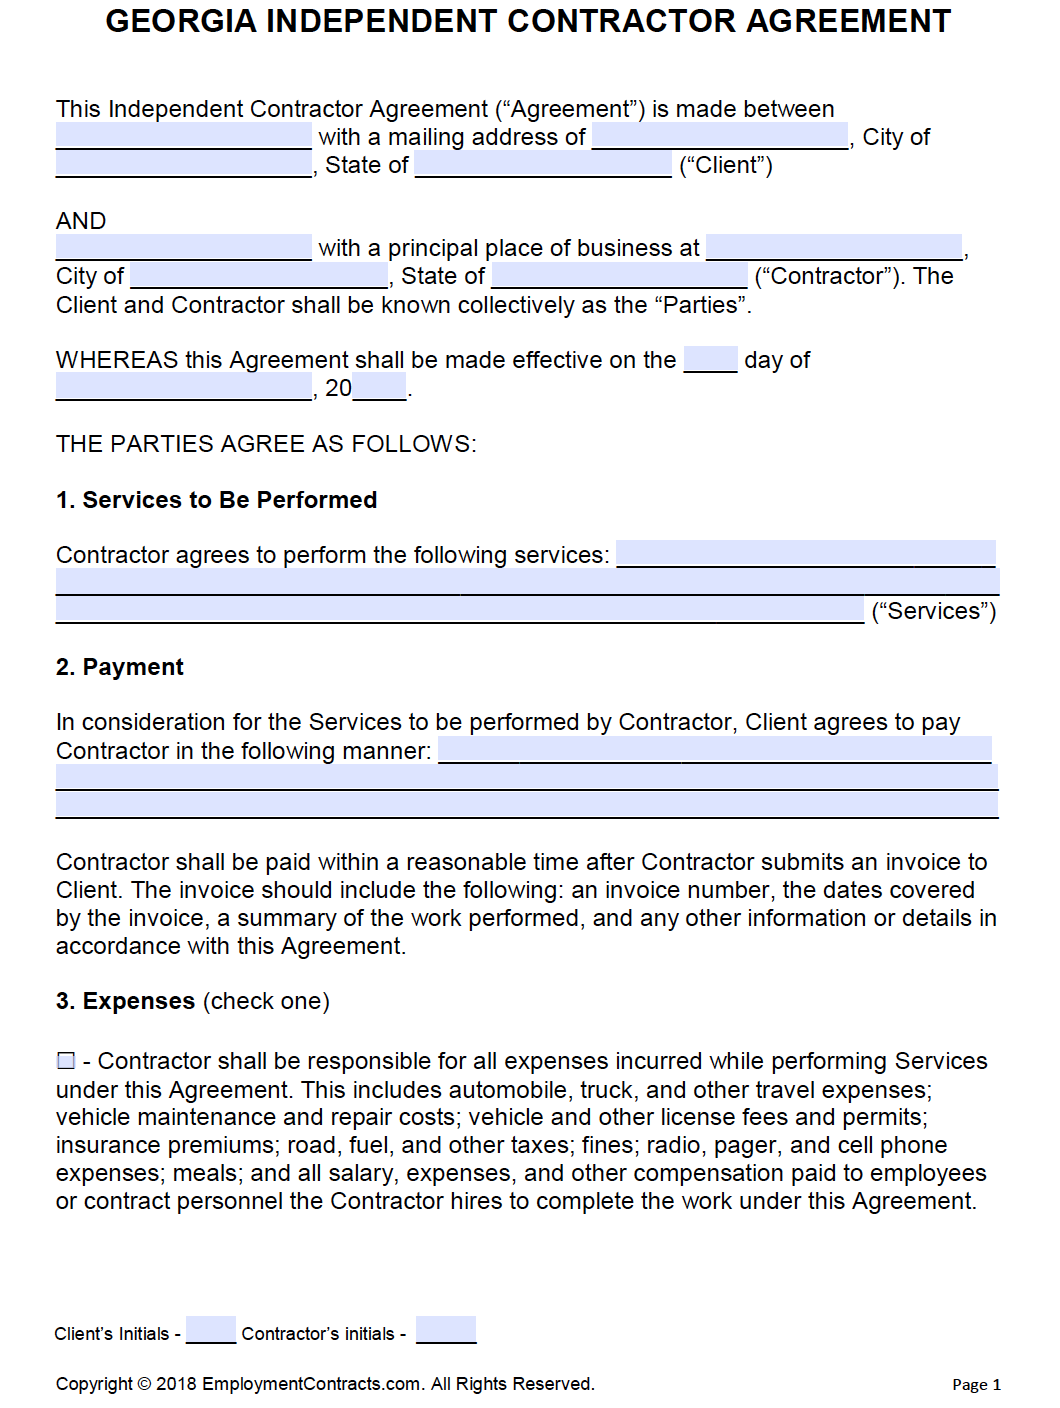 New Jersey Independent Contractor Agreement, PDF